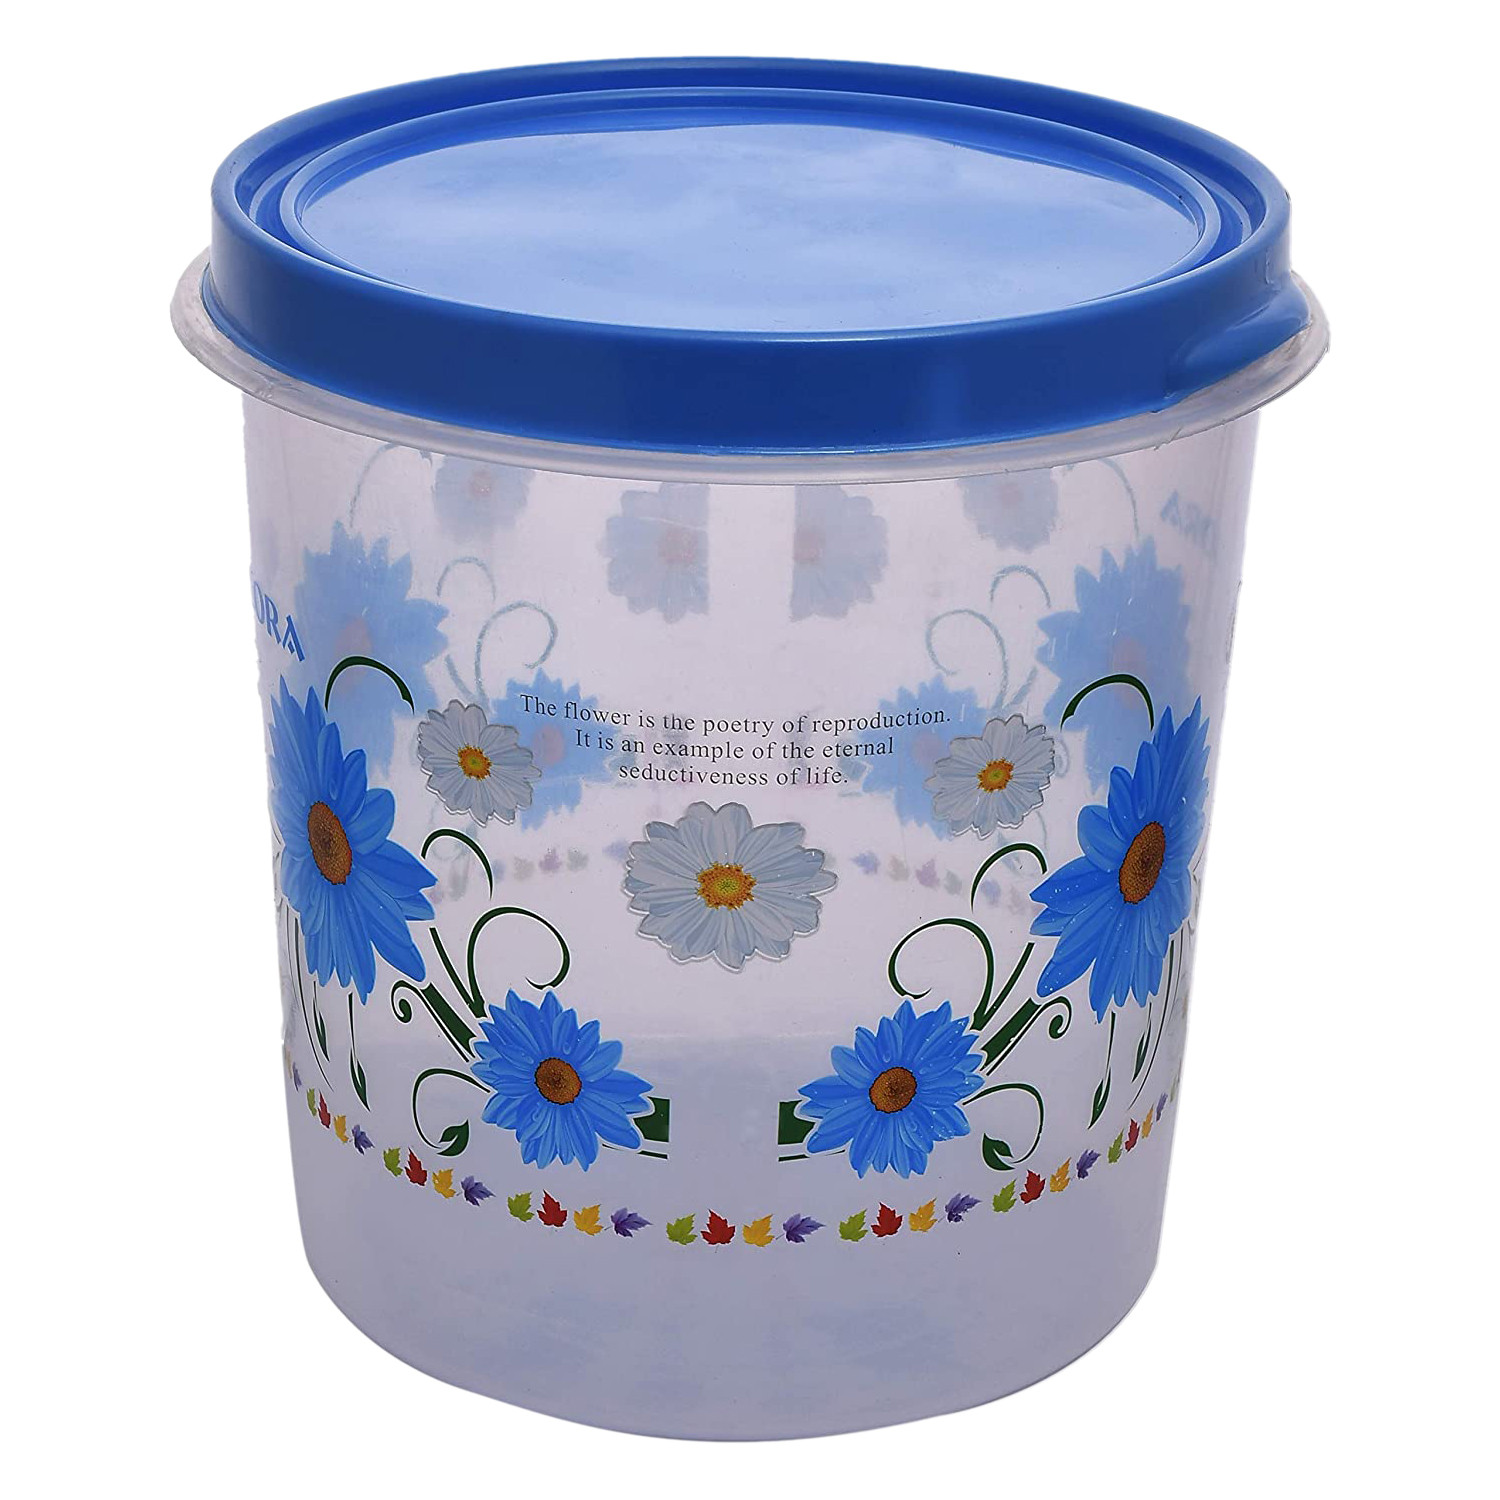 Kuber Industries Storage Container|Durable Plastic Floral Design BPA Free Food Kitchen Organizer With Lid|Food Utility Jar, 5 Ltr (Blue)